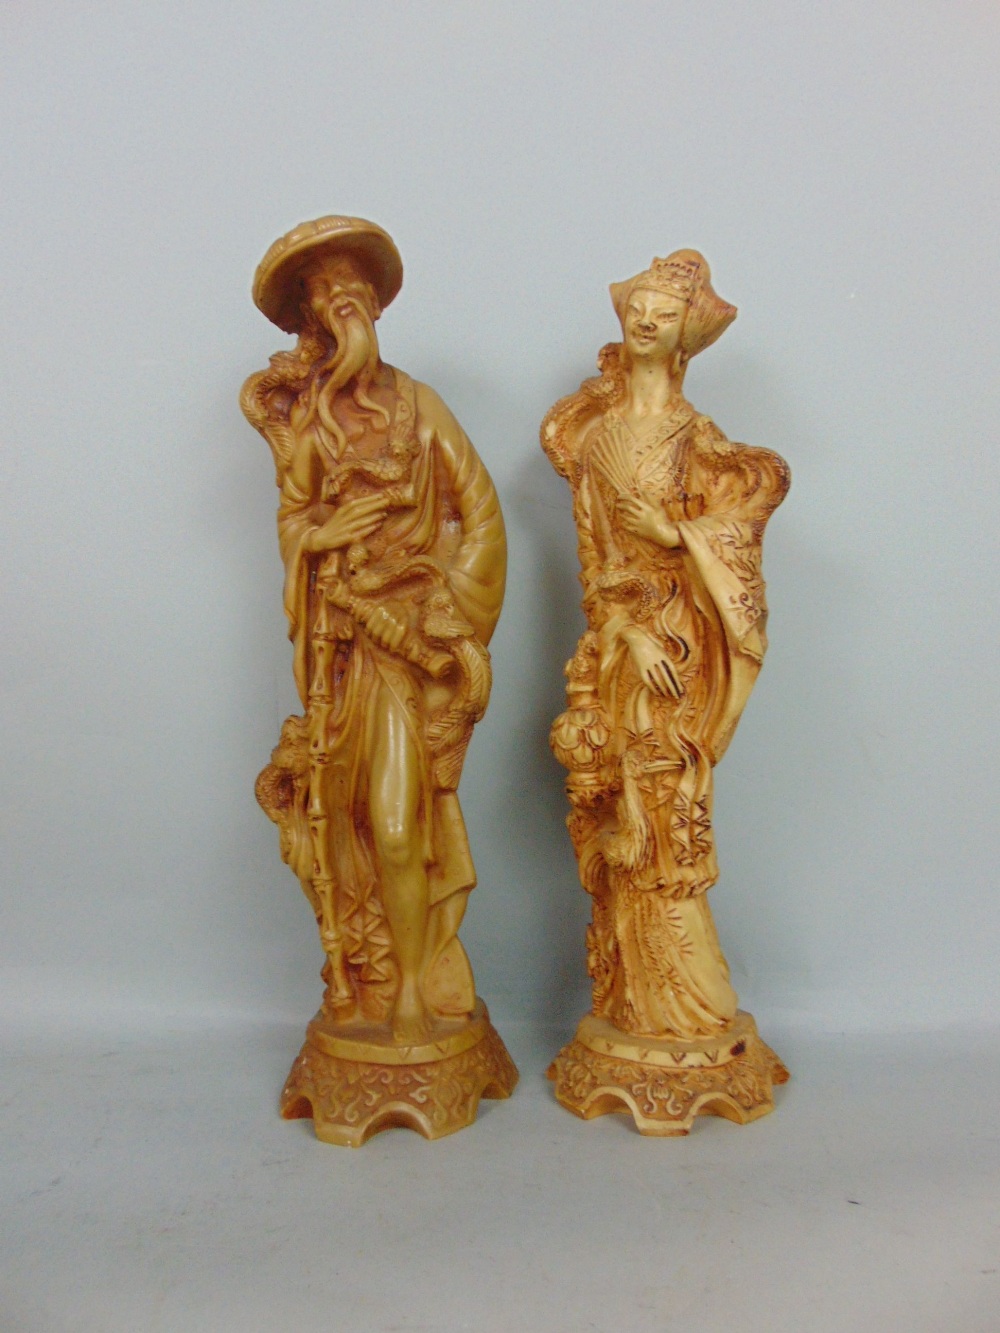 A collection of decorative brasswares including a figure of a miner, street barrow, monkeys, shell - Image 2 of 3